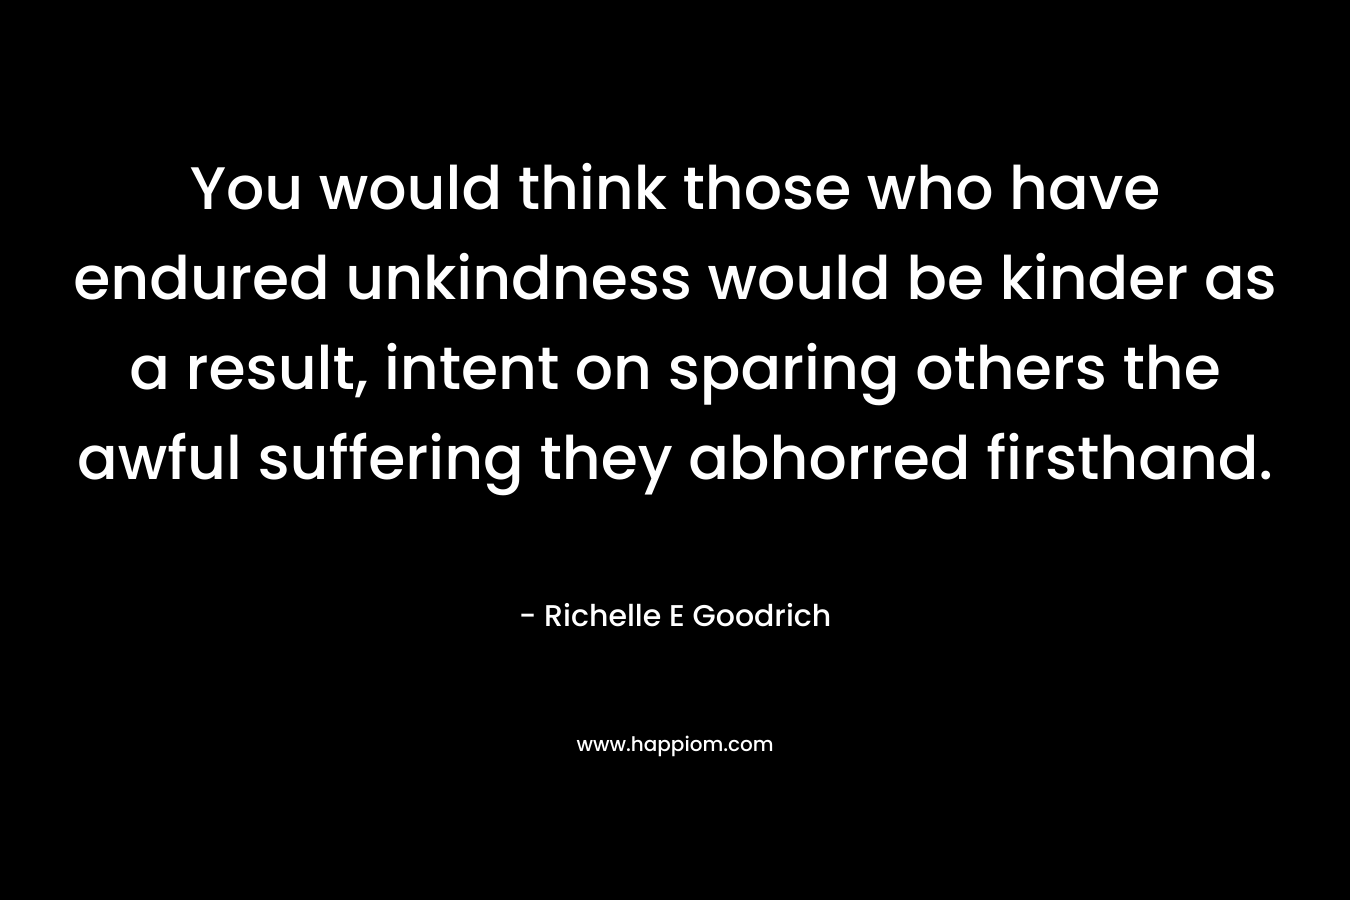 You would think those who have endured unkindness would be kinder as a result, intent on sparing others the awful suffering they abhorred firsthand. – Richelle E Goodrich